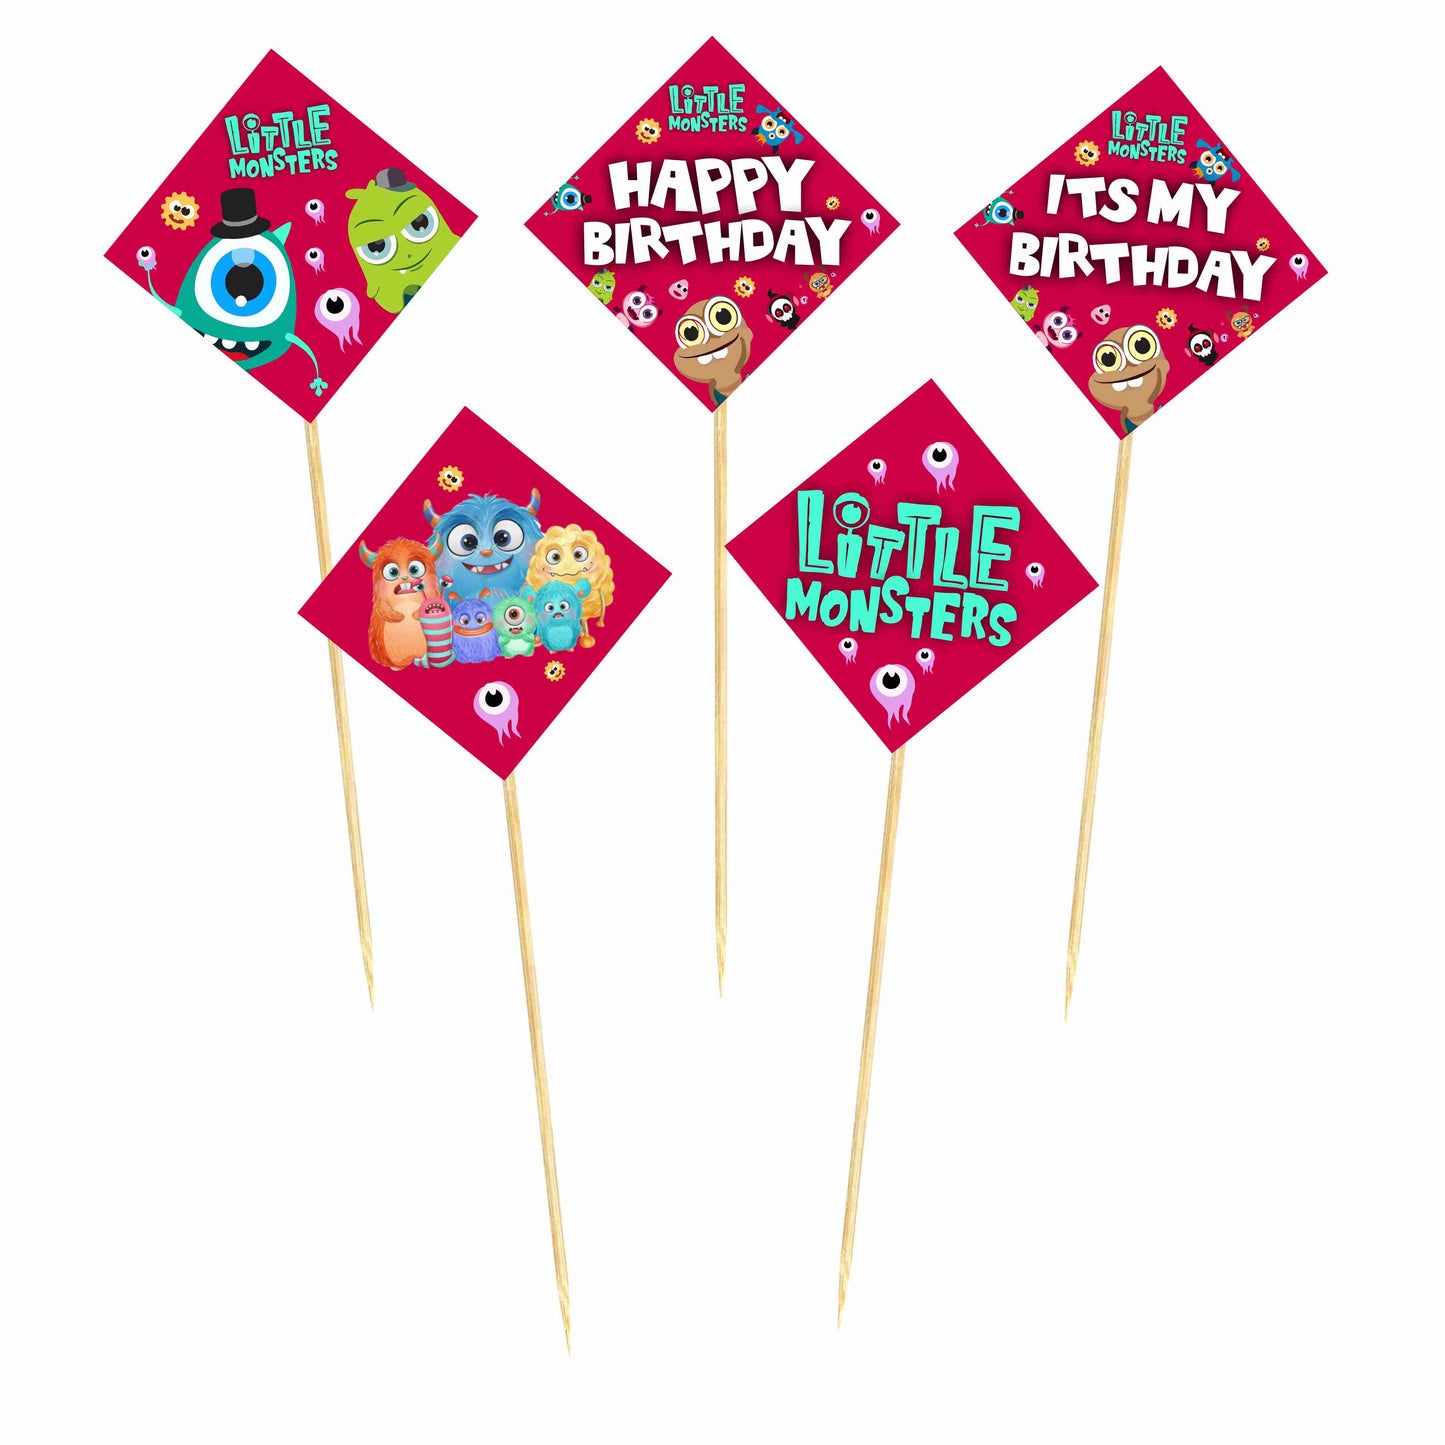 Little Monster Theme Cake Topper Pack of 10 Nos for Birthday Cake Decoration Theme Party Item For Boys Girls Adults Birthday Theme Decor